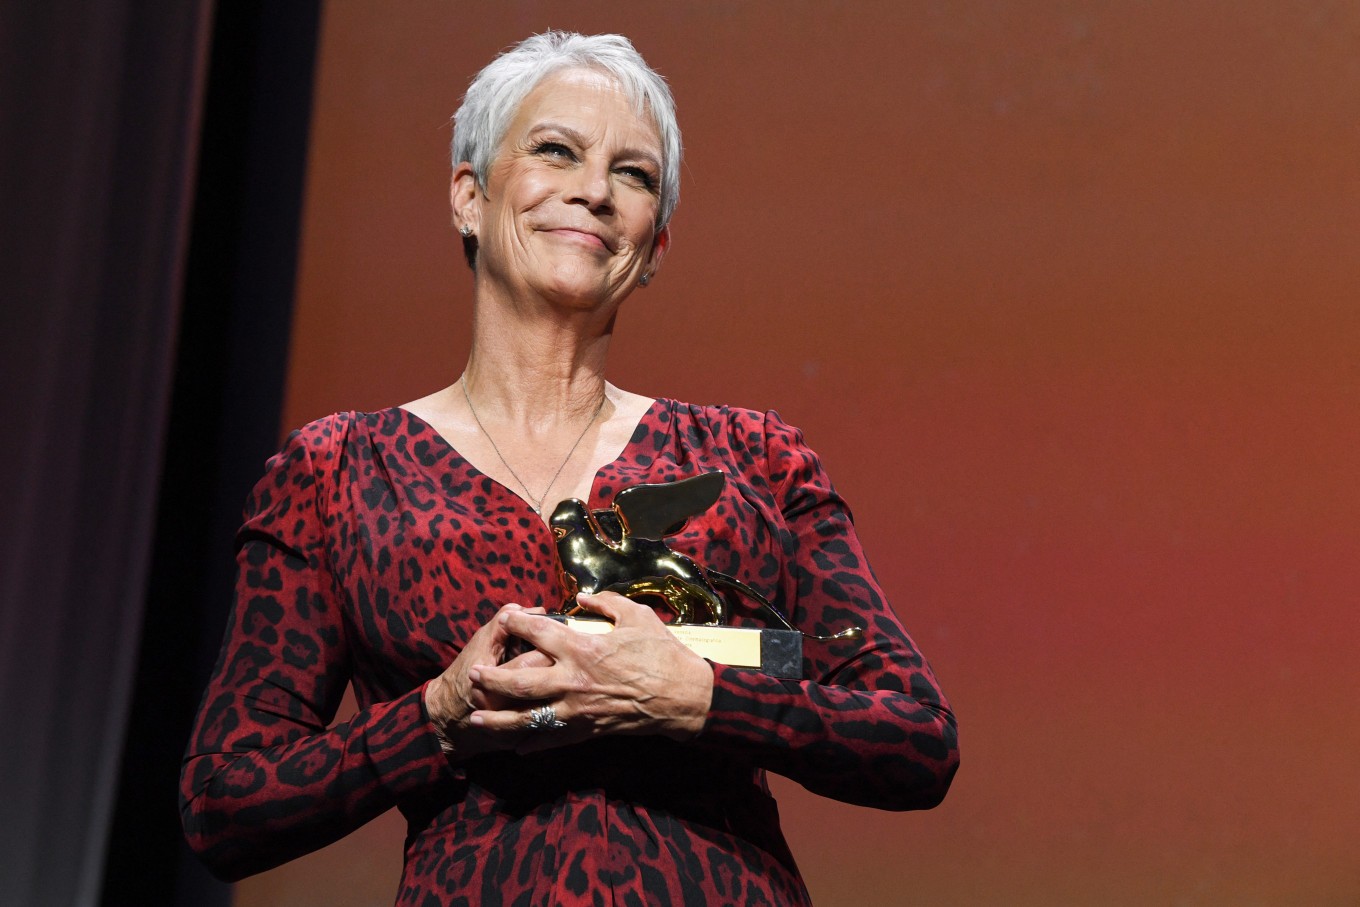 Jamie Lee Curtis was called a "nepo baby".